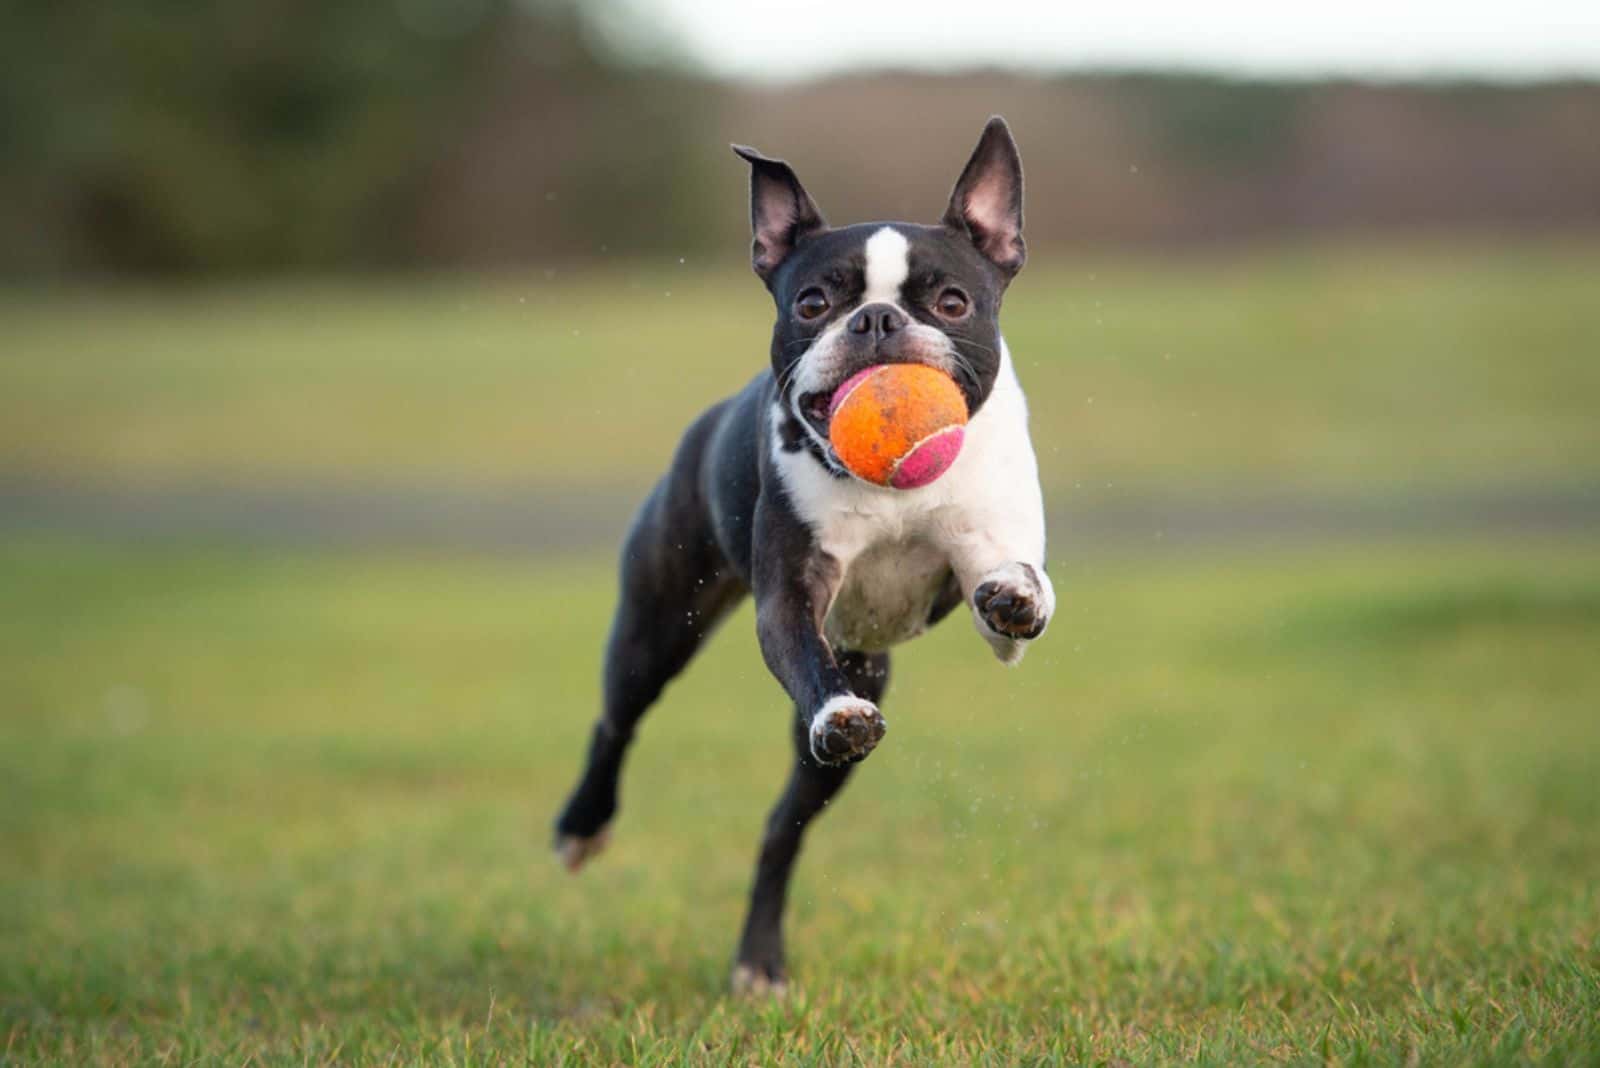 boston terrier running with ball in mouth